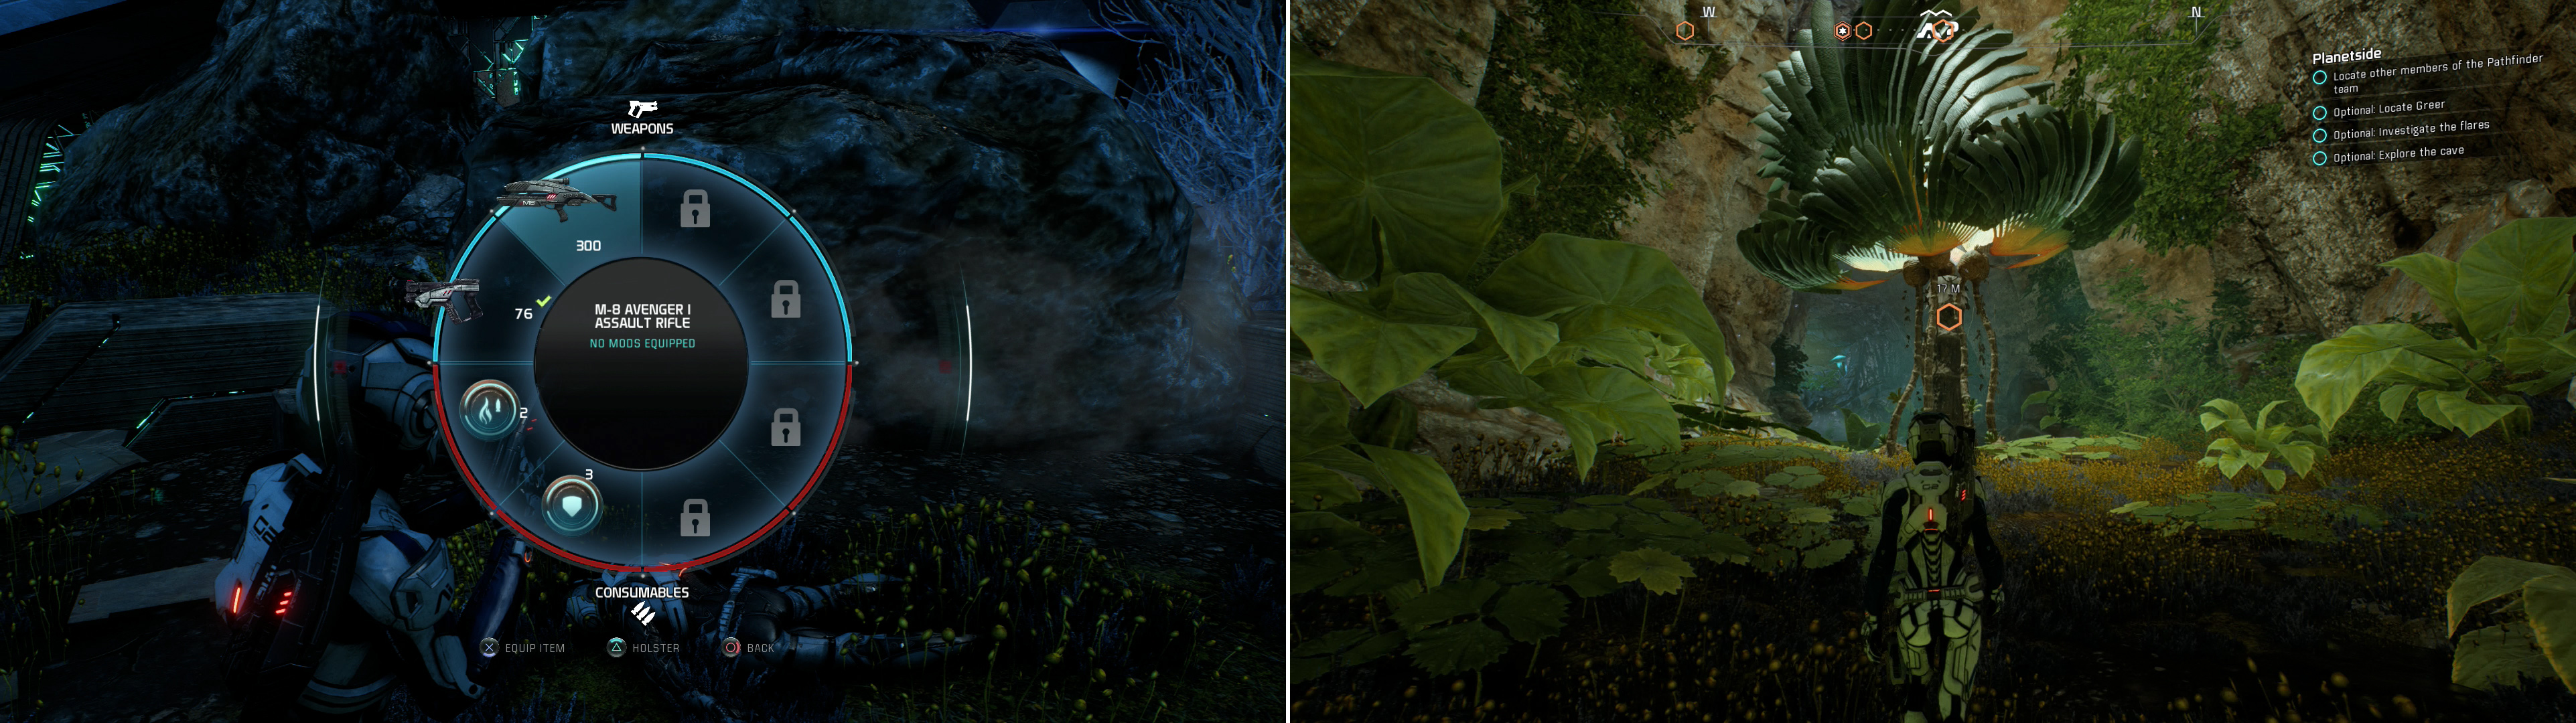 Search Kirkland’s body for an M-8 Avenger Assault Rifle (left). In a sheltered cave you’ll be able to catch a glimpse of Habitat 7 as it once was (right).